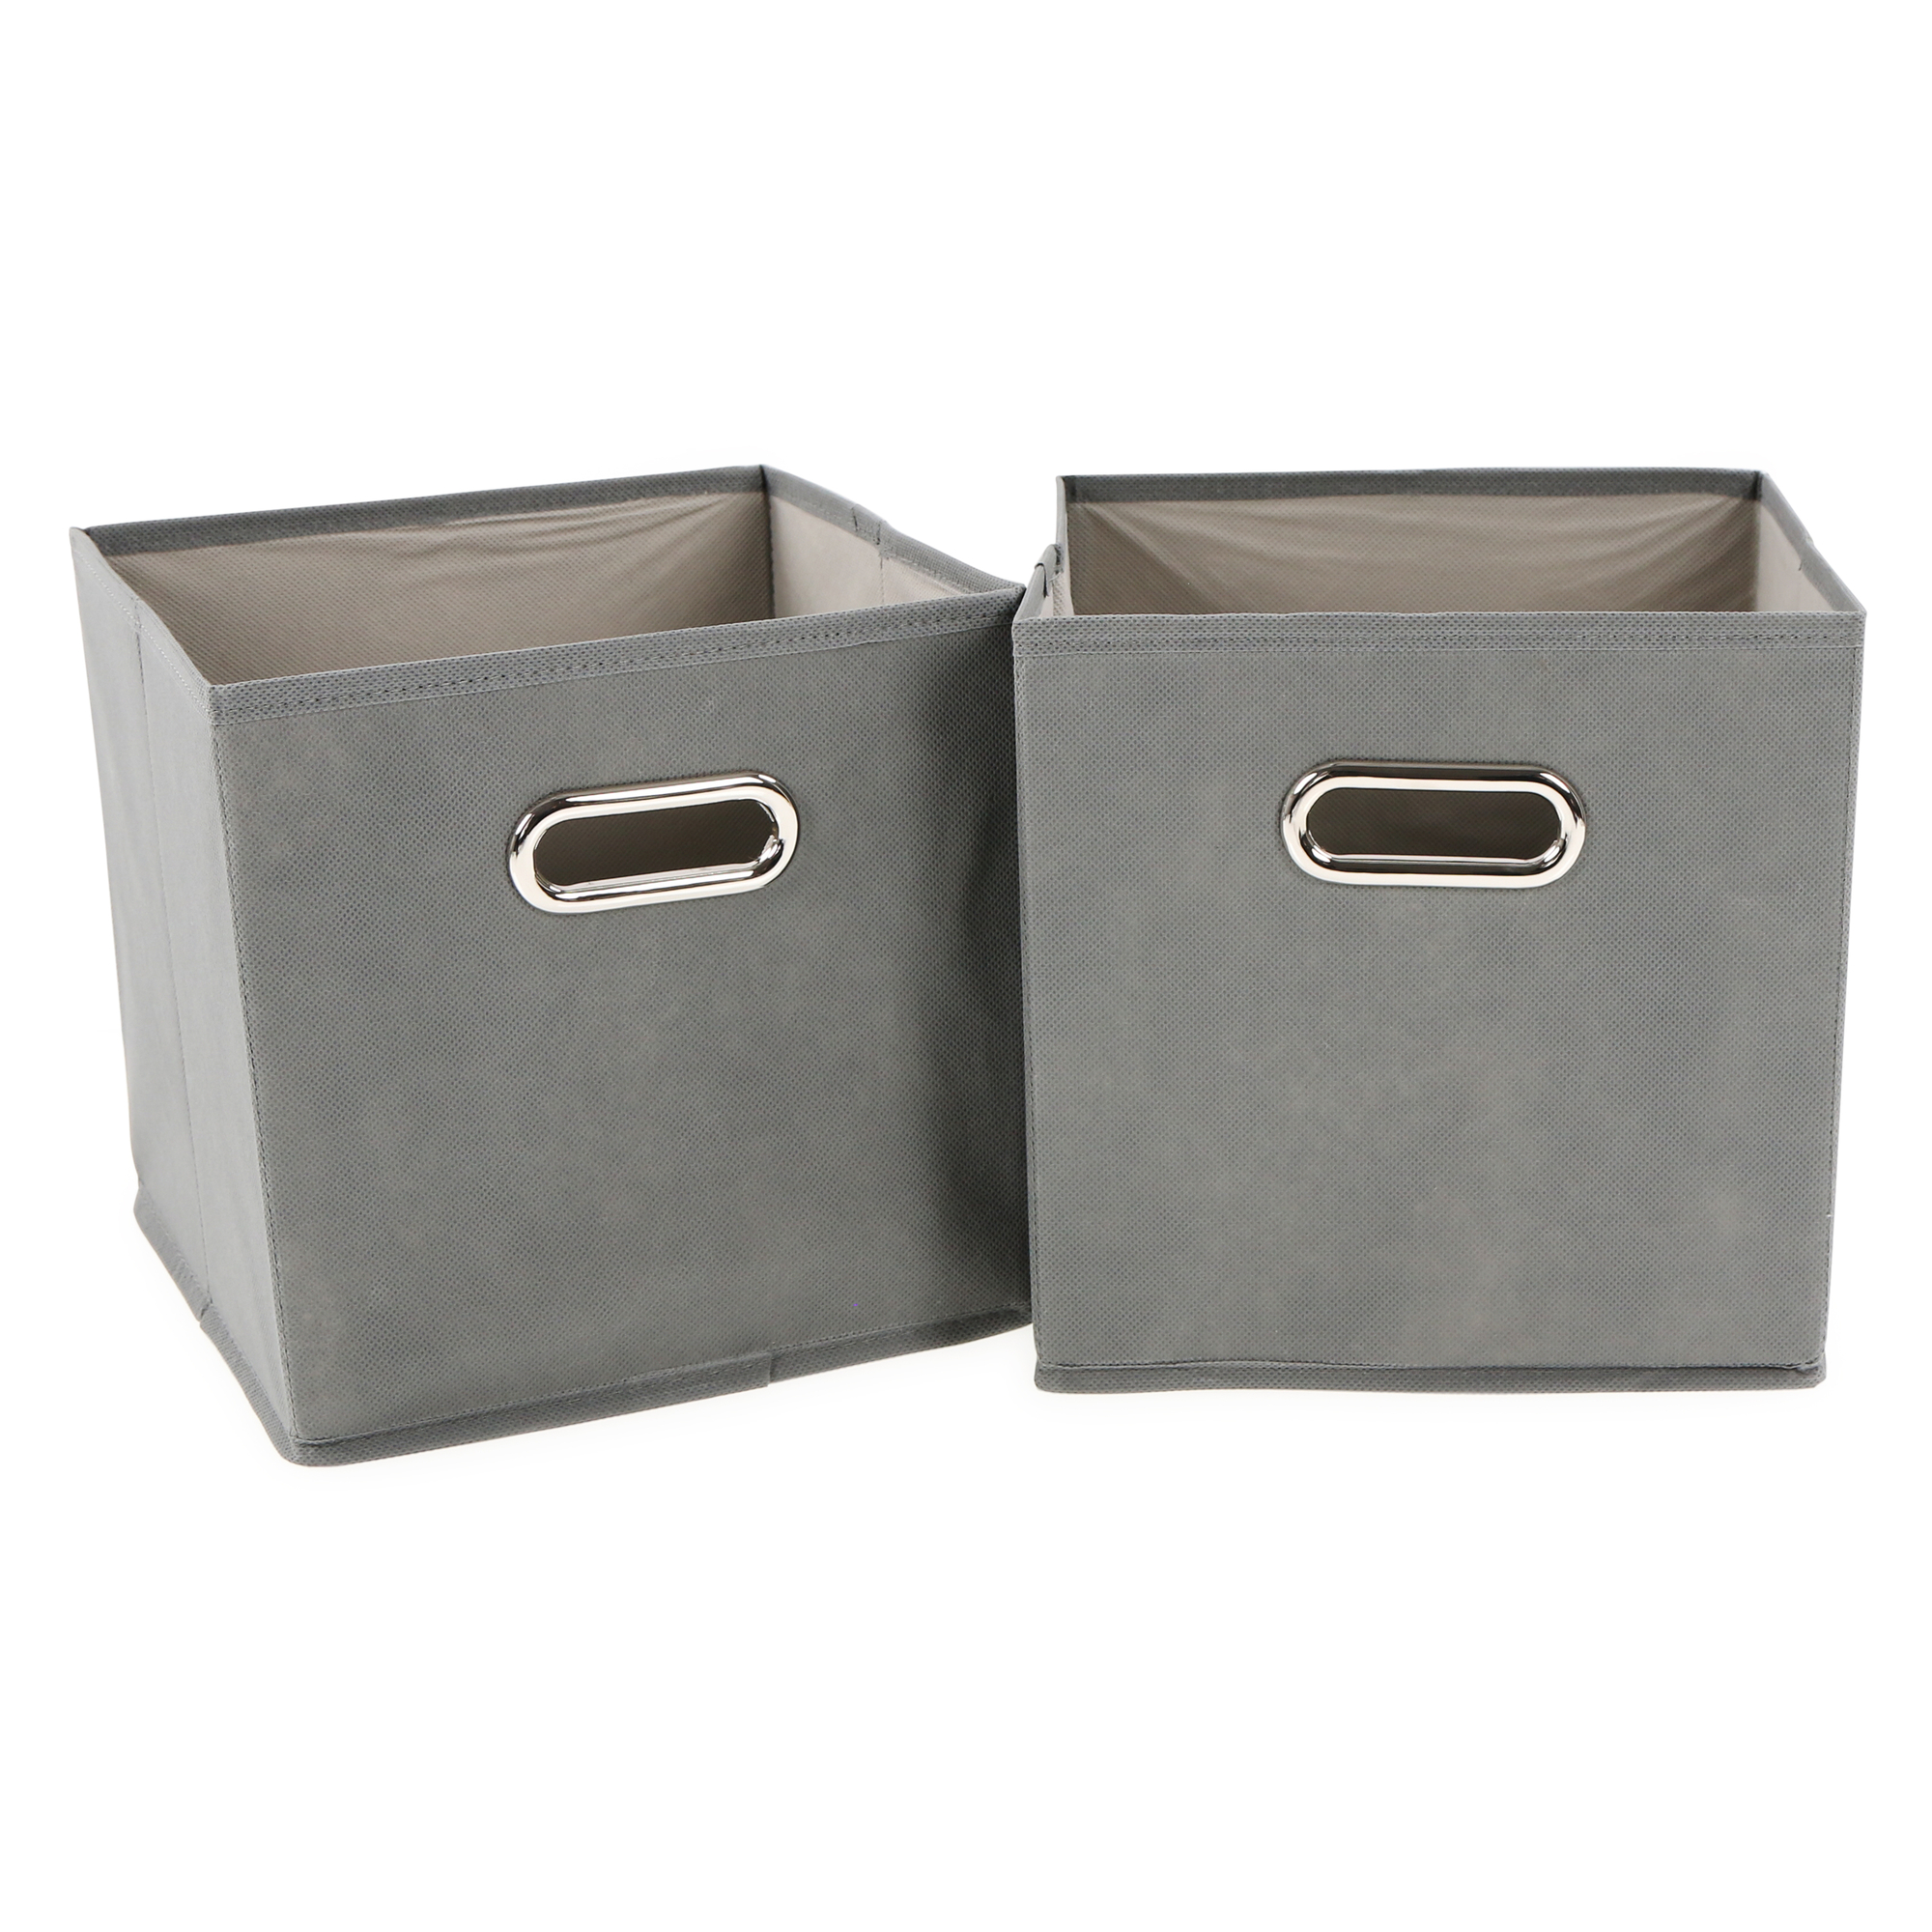 collapsible storage bins 2-pack set 10in x